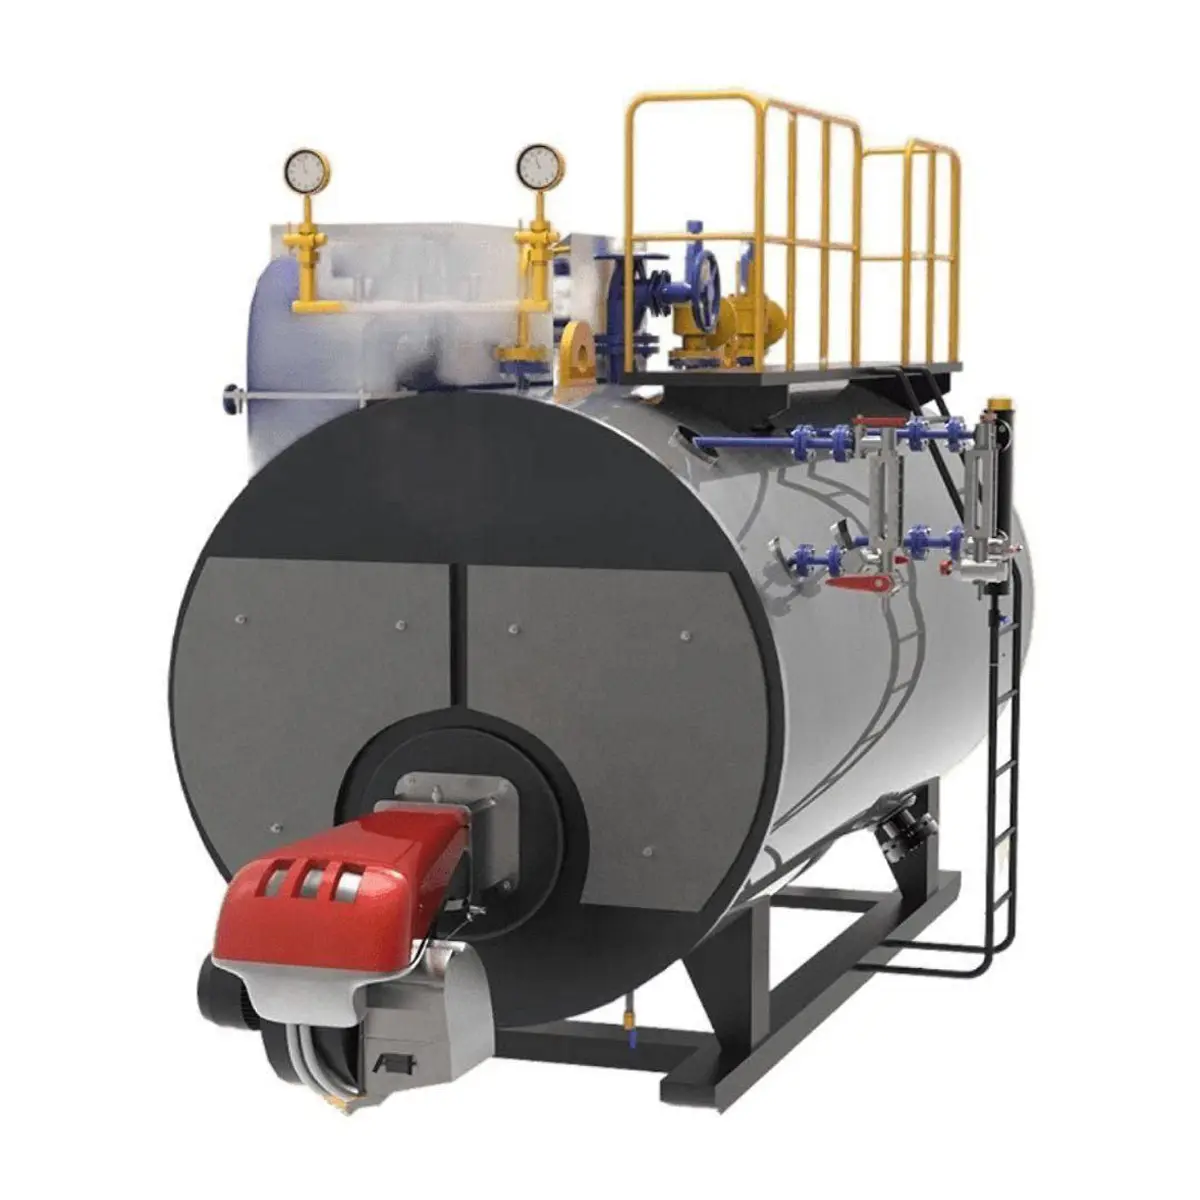 Hot selling steam boiler 300 kg per hour wholesale from manufacturer hot water boilers for sale